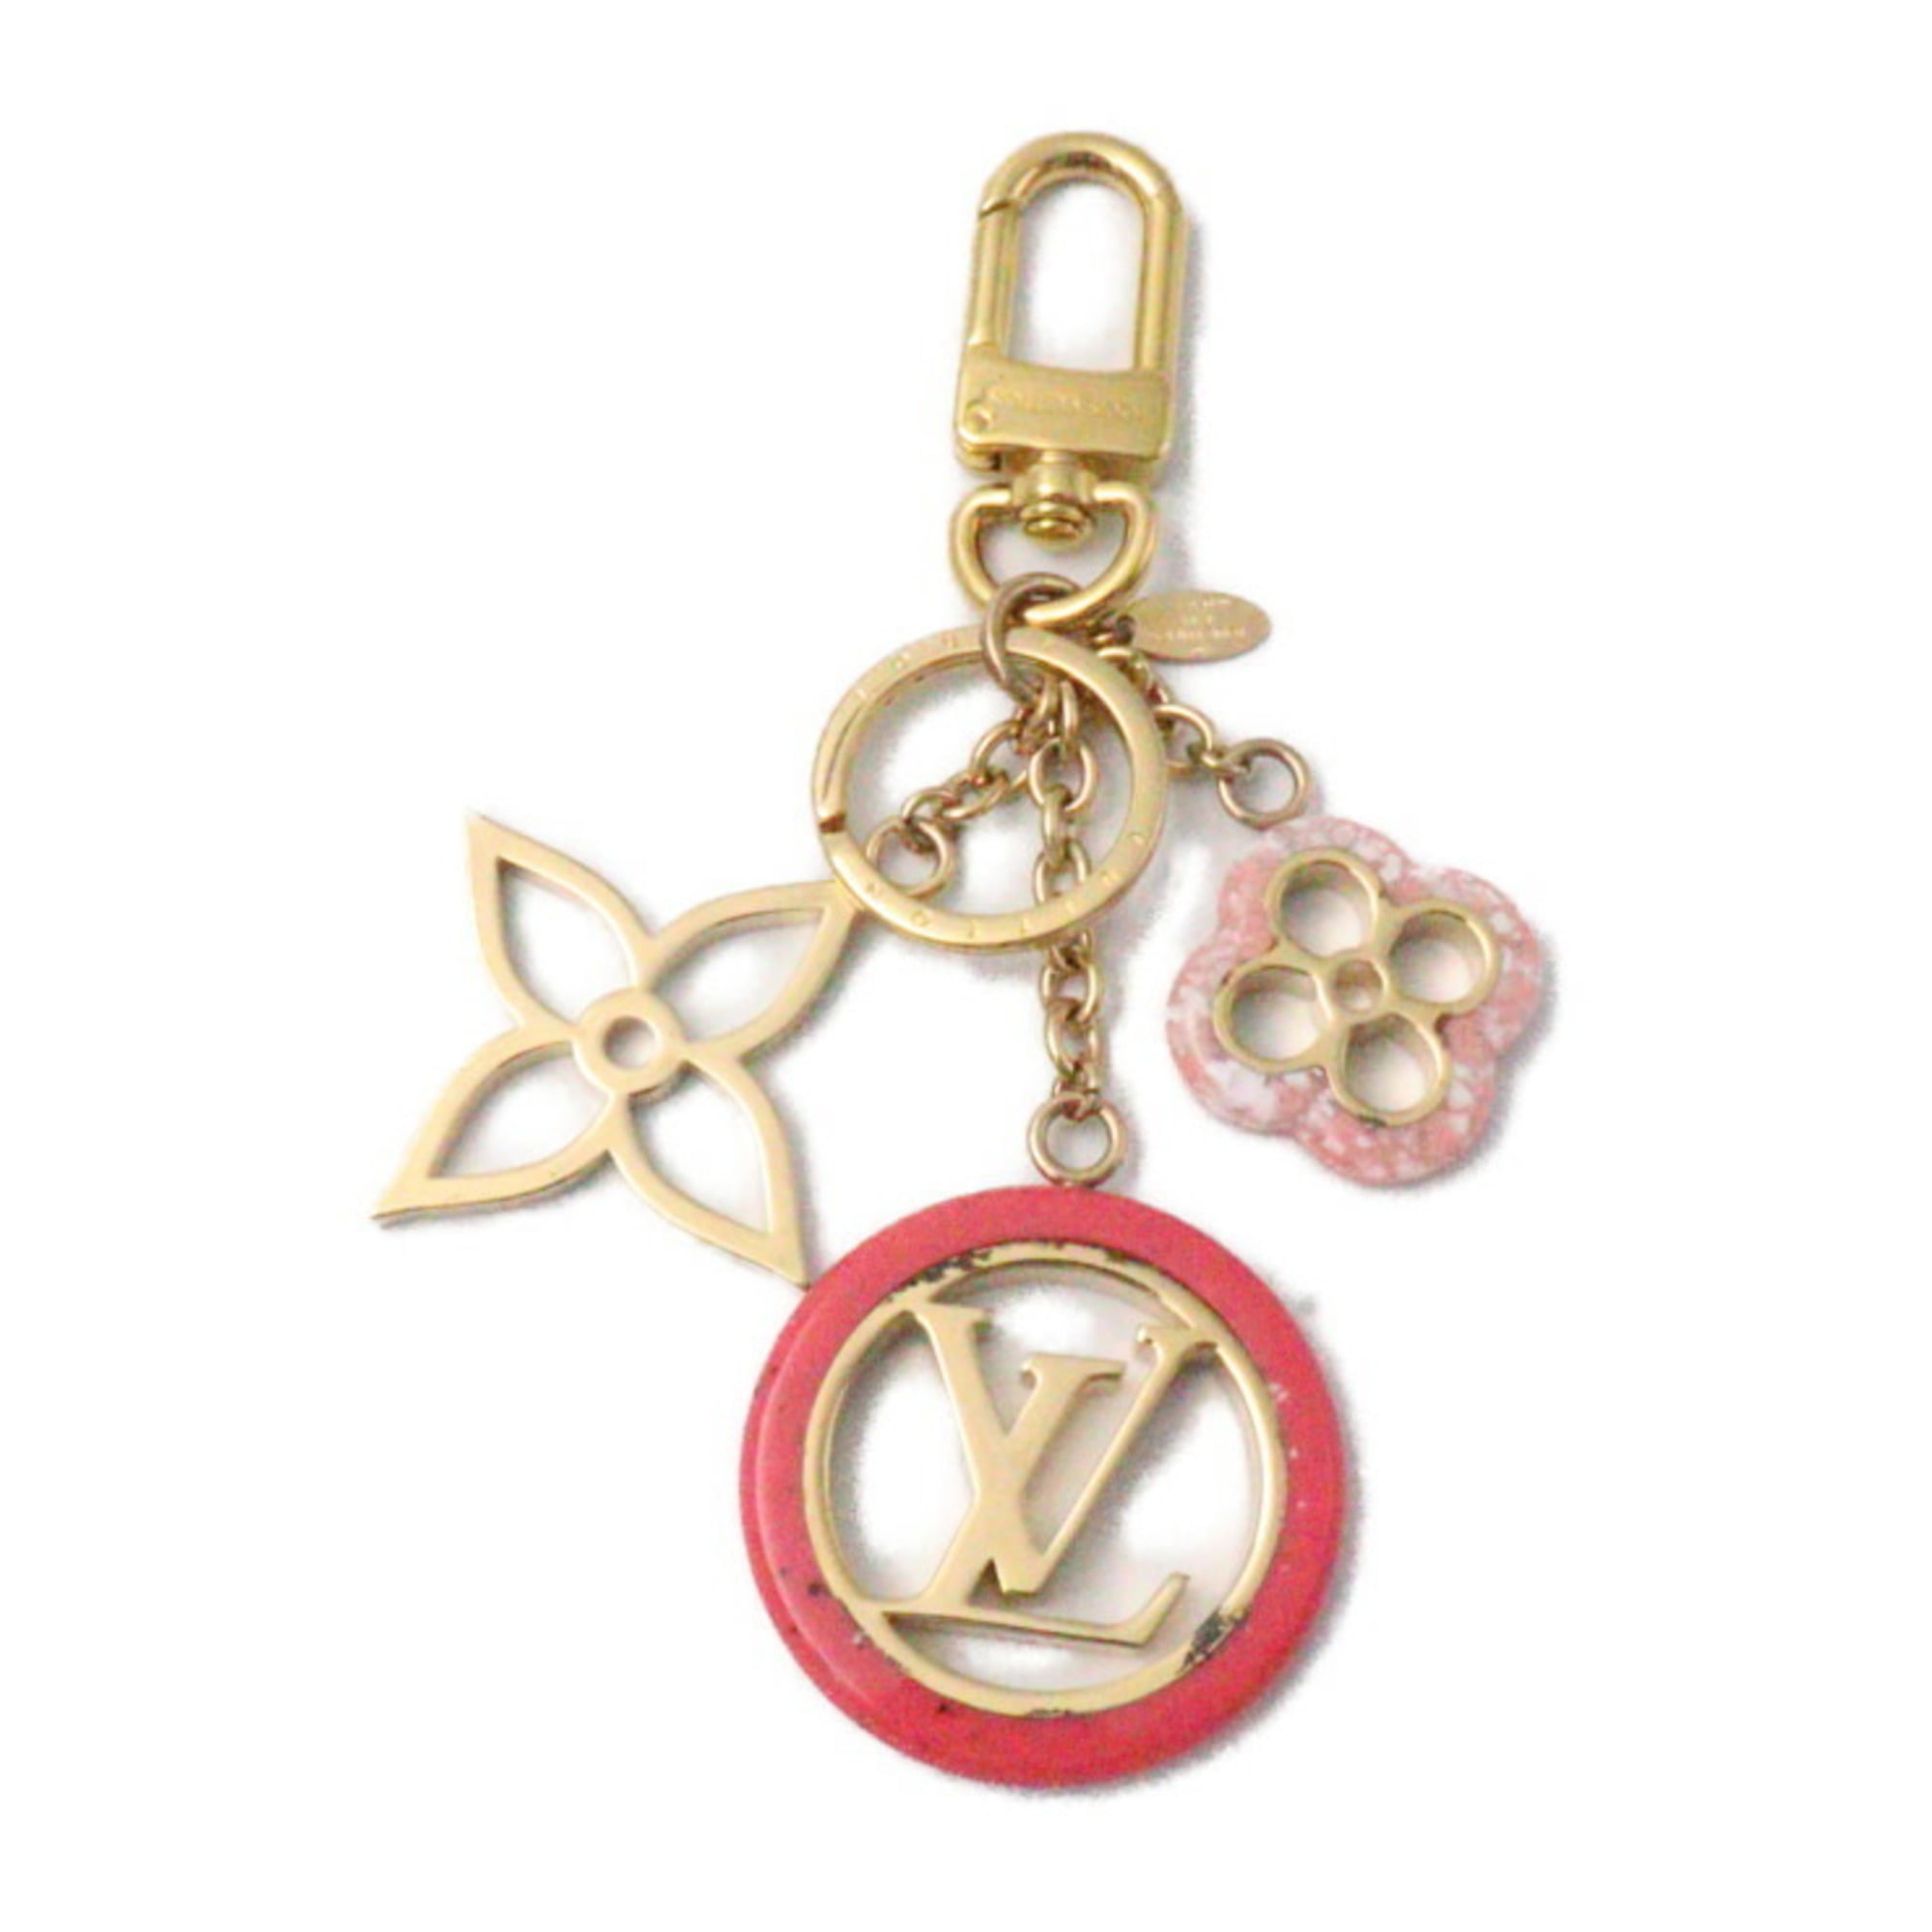 LOUIS VUITTON Bag charm key holder ring chain AUTH Portocre Messager M66264  LV